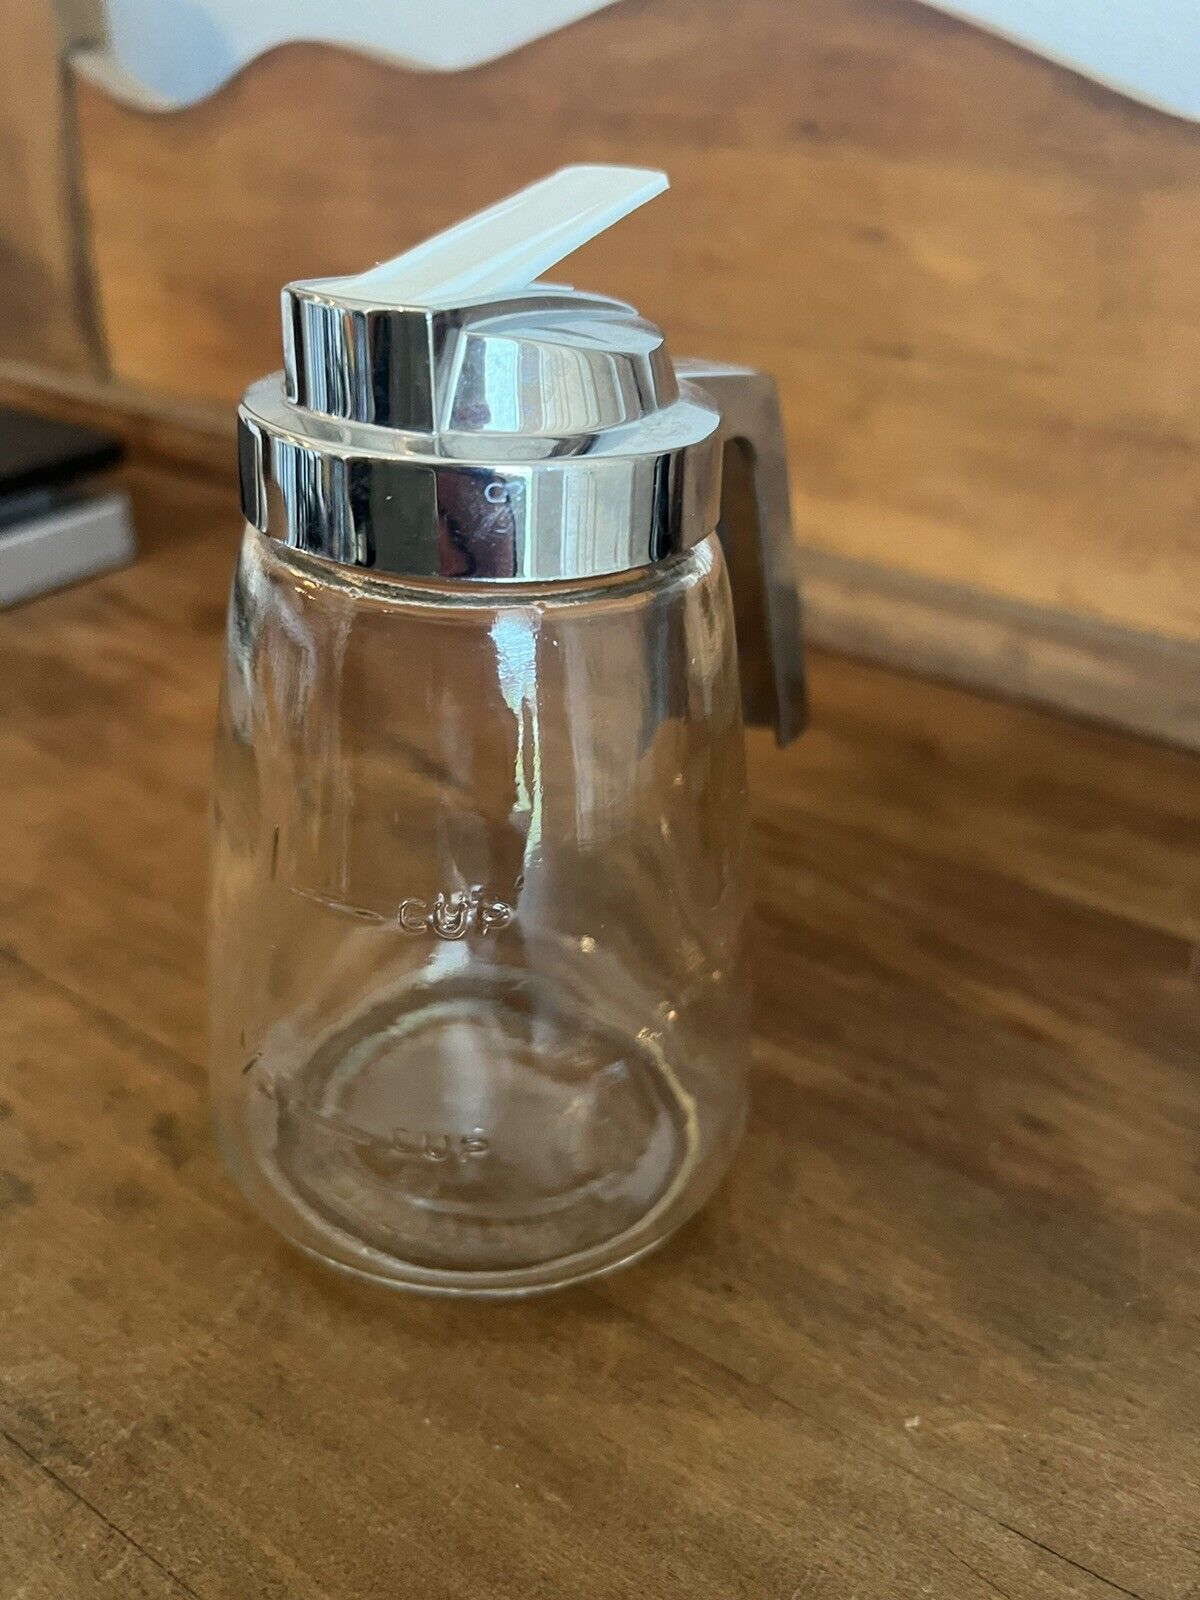 Vintage Lge Dripcut Glass Syrup Dispenser with Chrome Handle FEDERAL HOUSEWARES